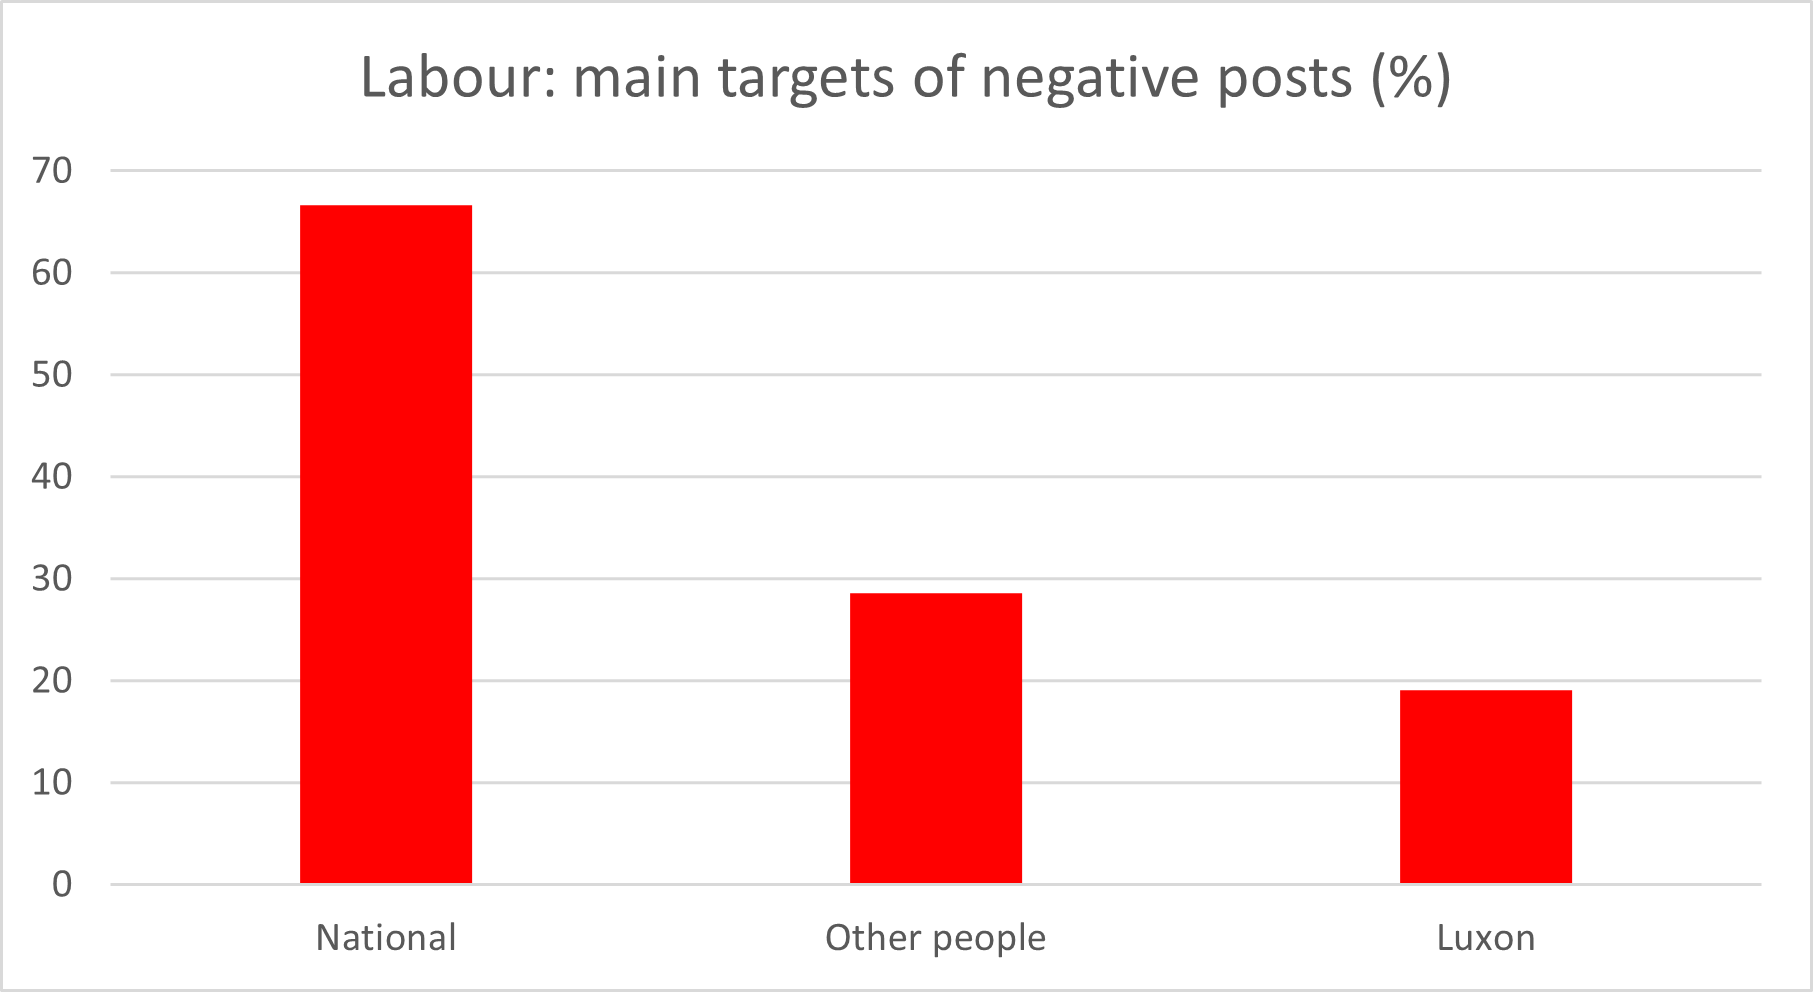 Targets of negative posts by Labour